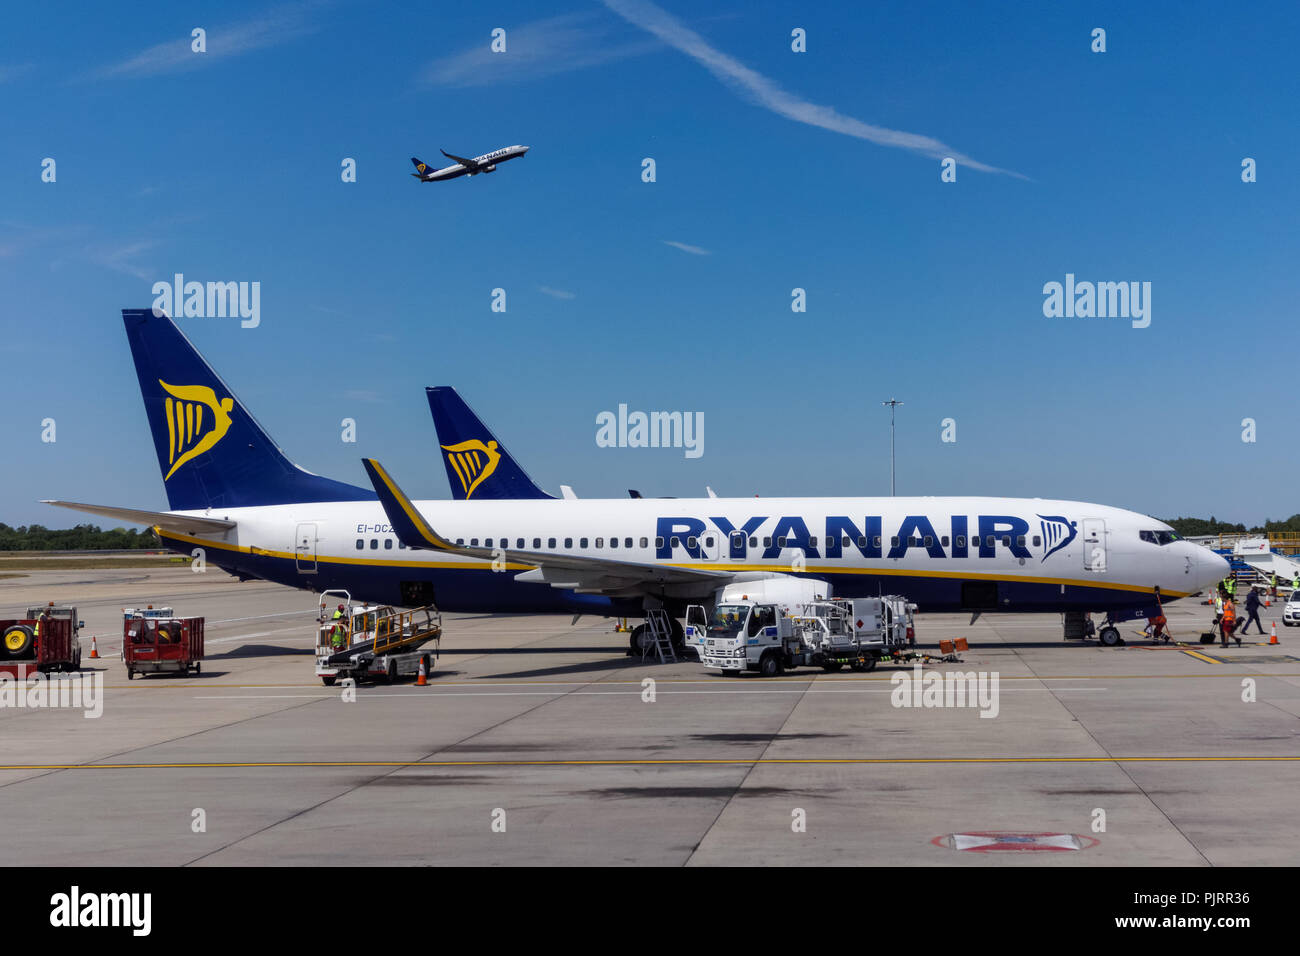 Ryanair planes at London Stansted Airport, England United Kingdom UK Stock Photo